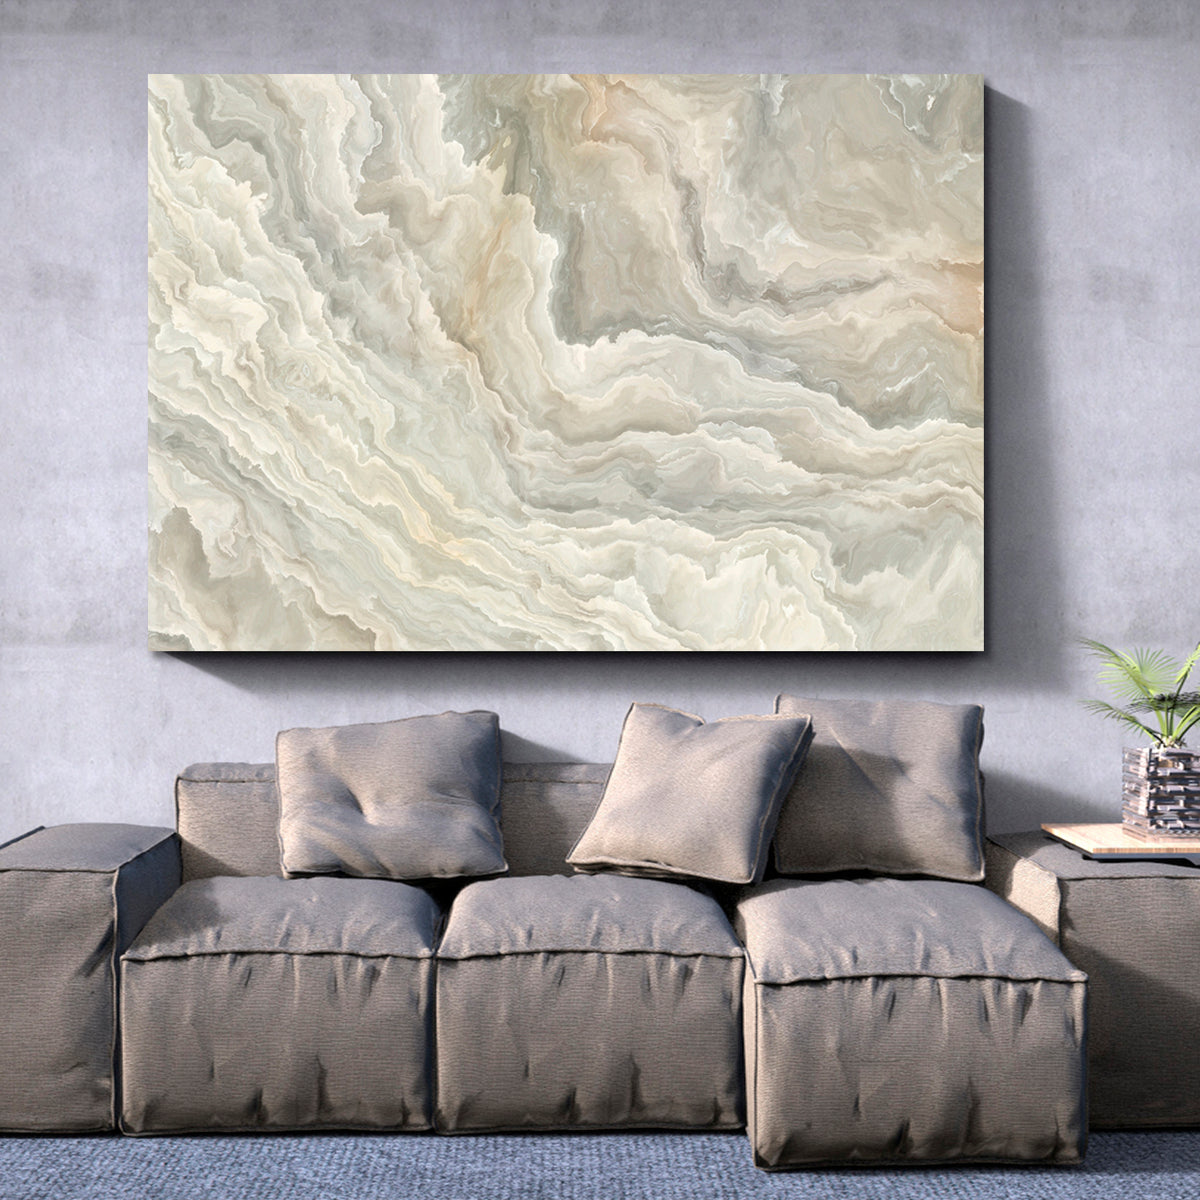 MARBLE Abstract White Onyx Wavy Pattern Natural Beauty Fluid Art, Oriental Marbling Canvas Print Artesty 1 panel 24" x 16" 